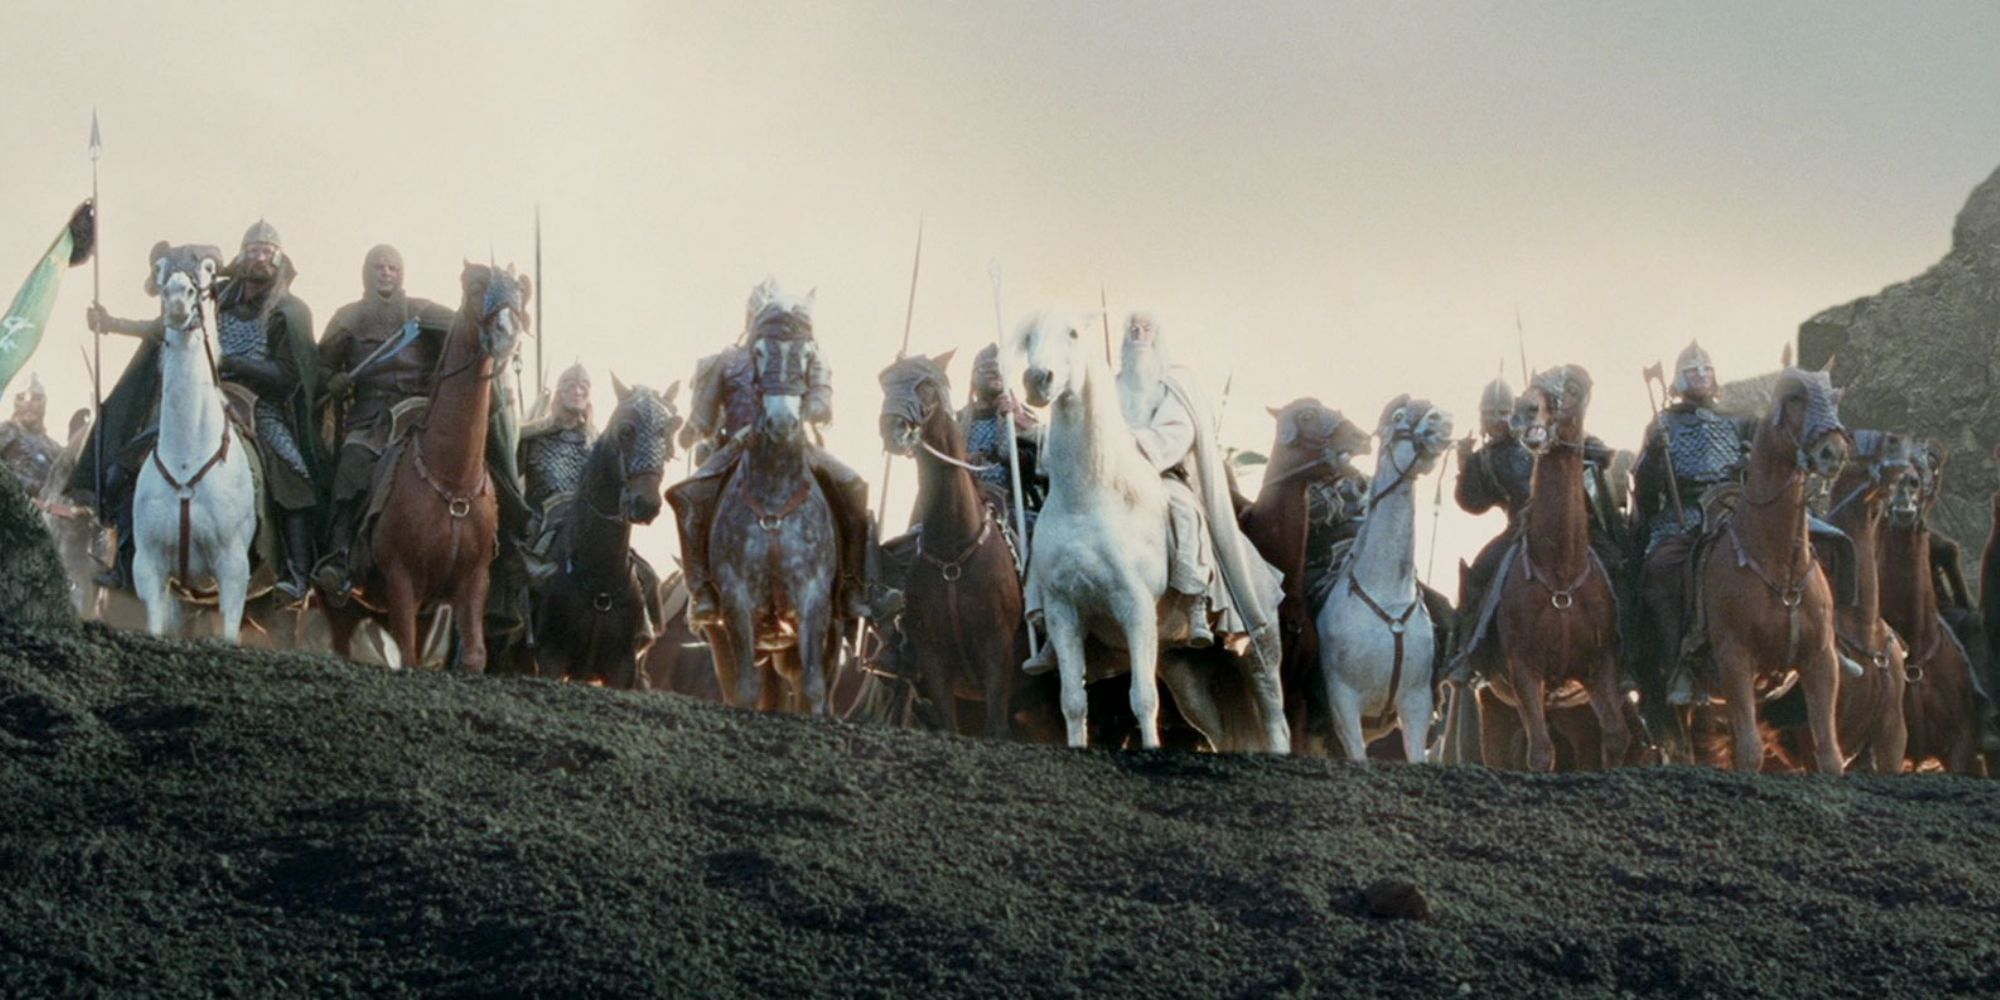 Lord of the Rings: The Two Towers Ending, Explained